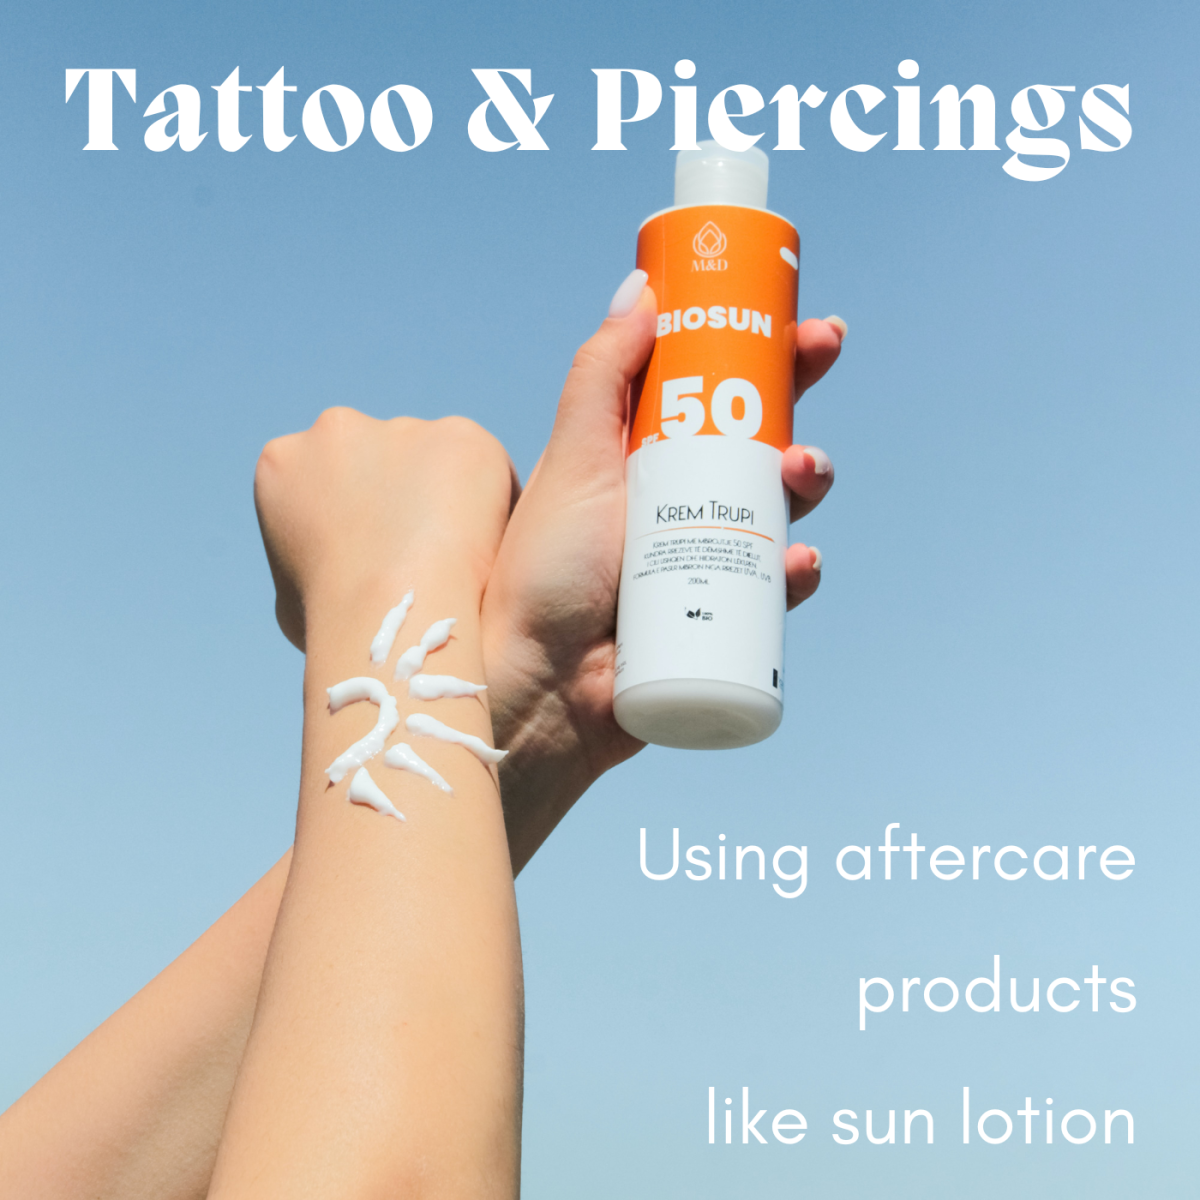 This article discusses tattoo and piercing aftercare, including thoghts on lotions like Savlon, Nivea, and even sunblock. 